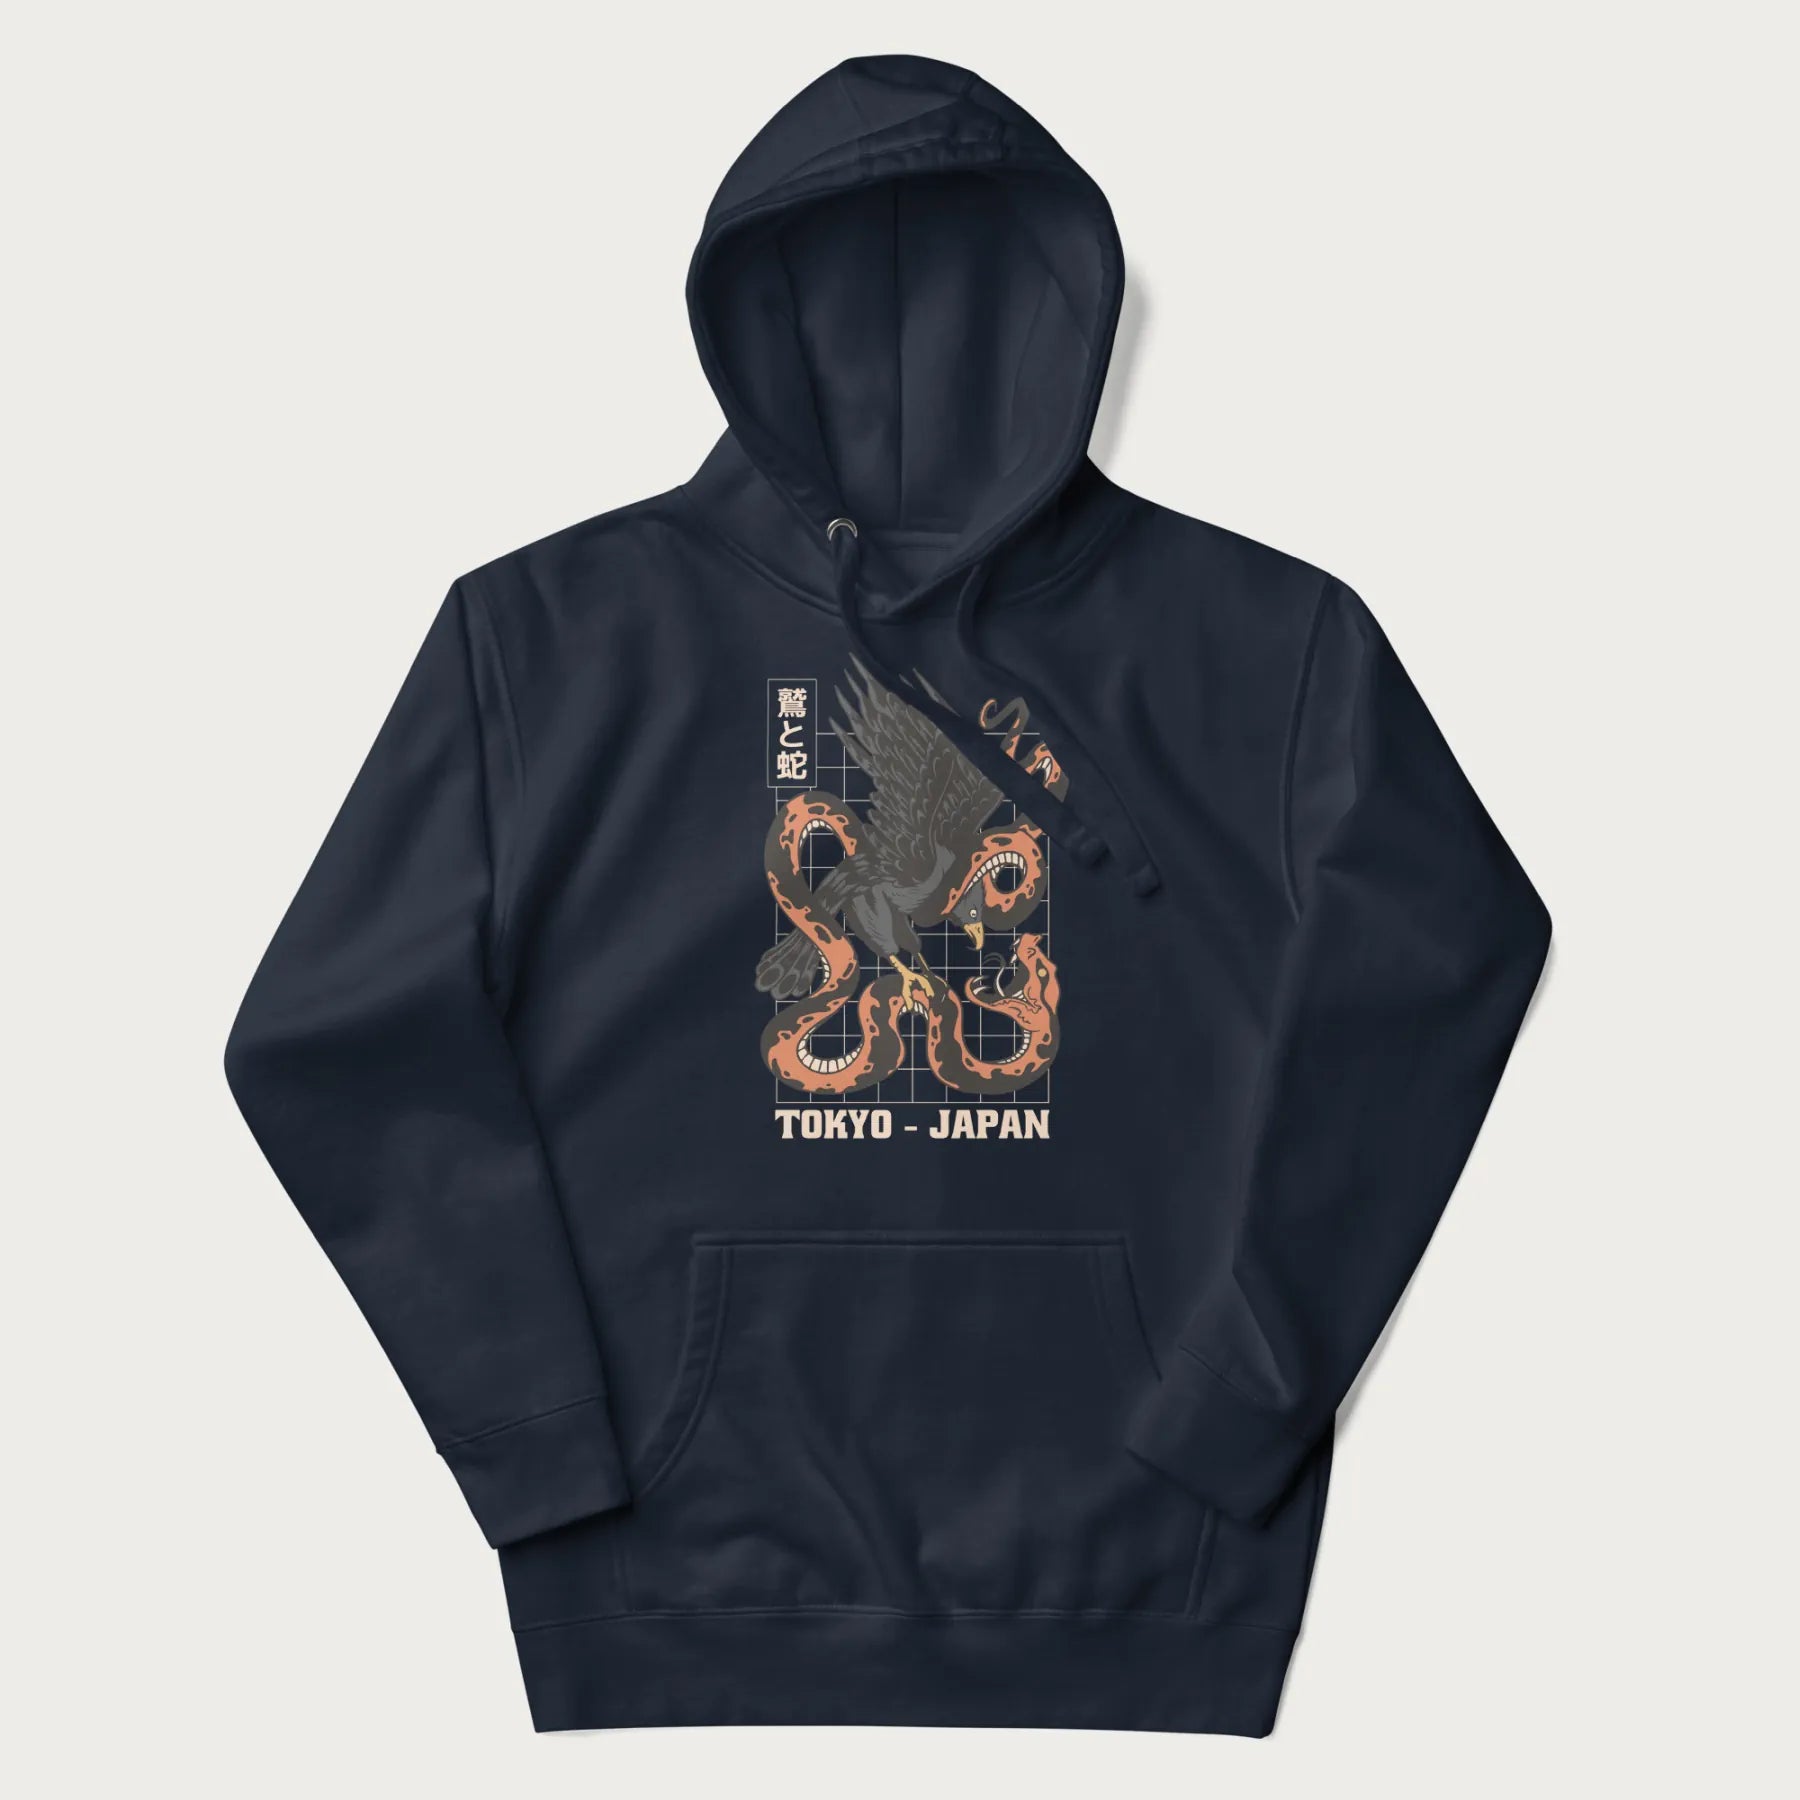 Navy blue hoodie with Japanese text and a graphic of an eagle battling a snake, with the text 'Tokyo Japan' underneath.